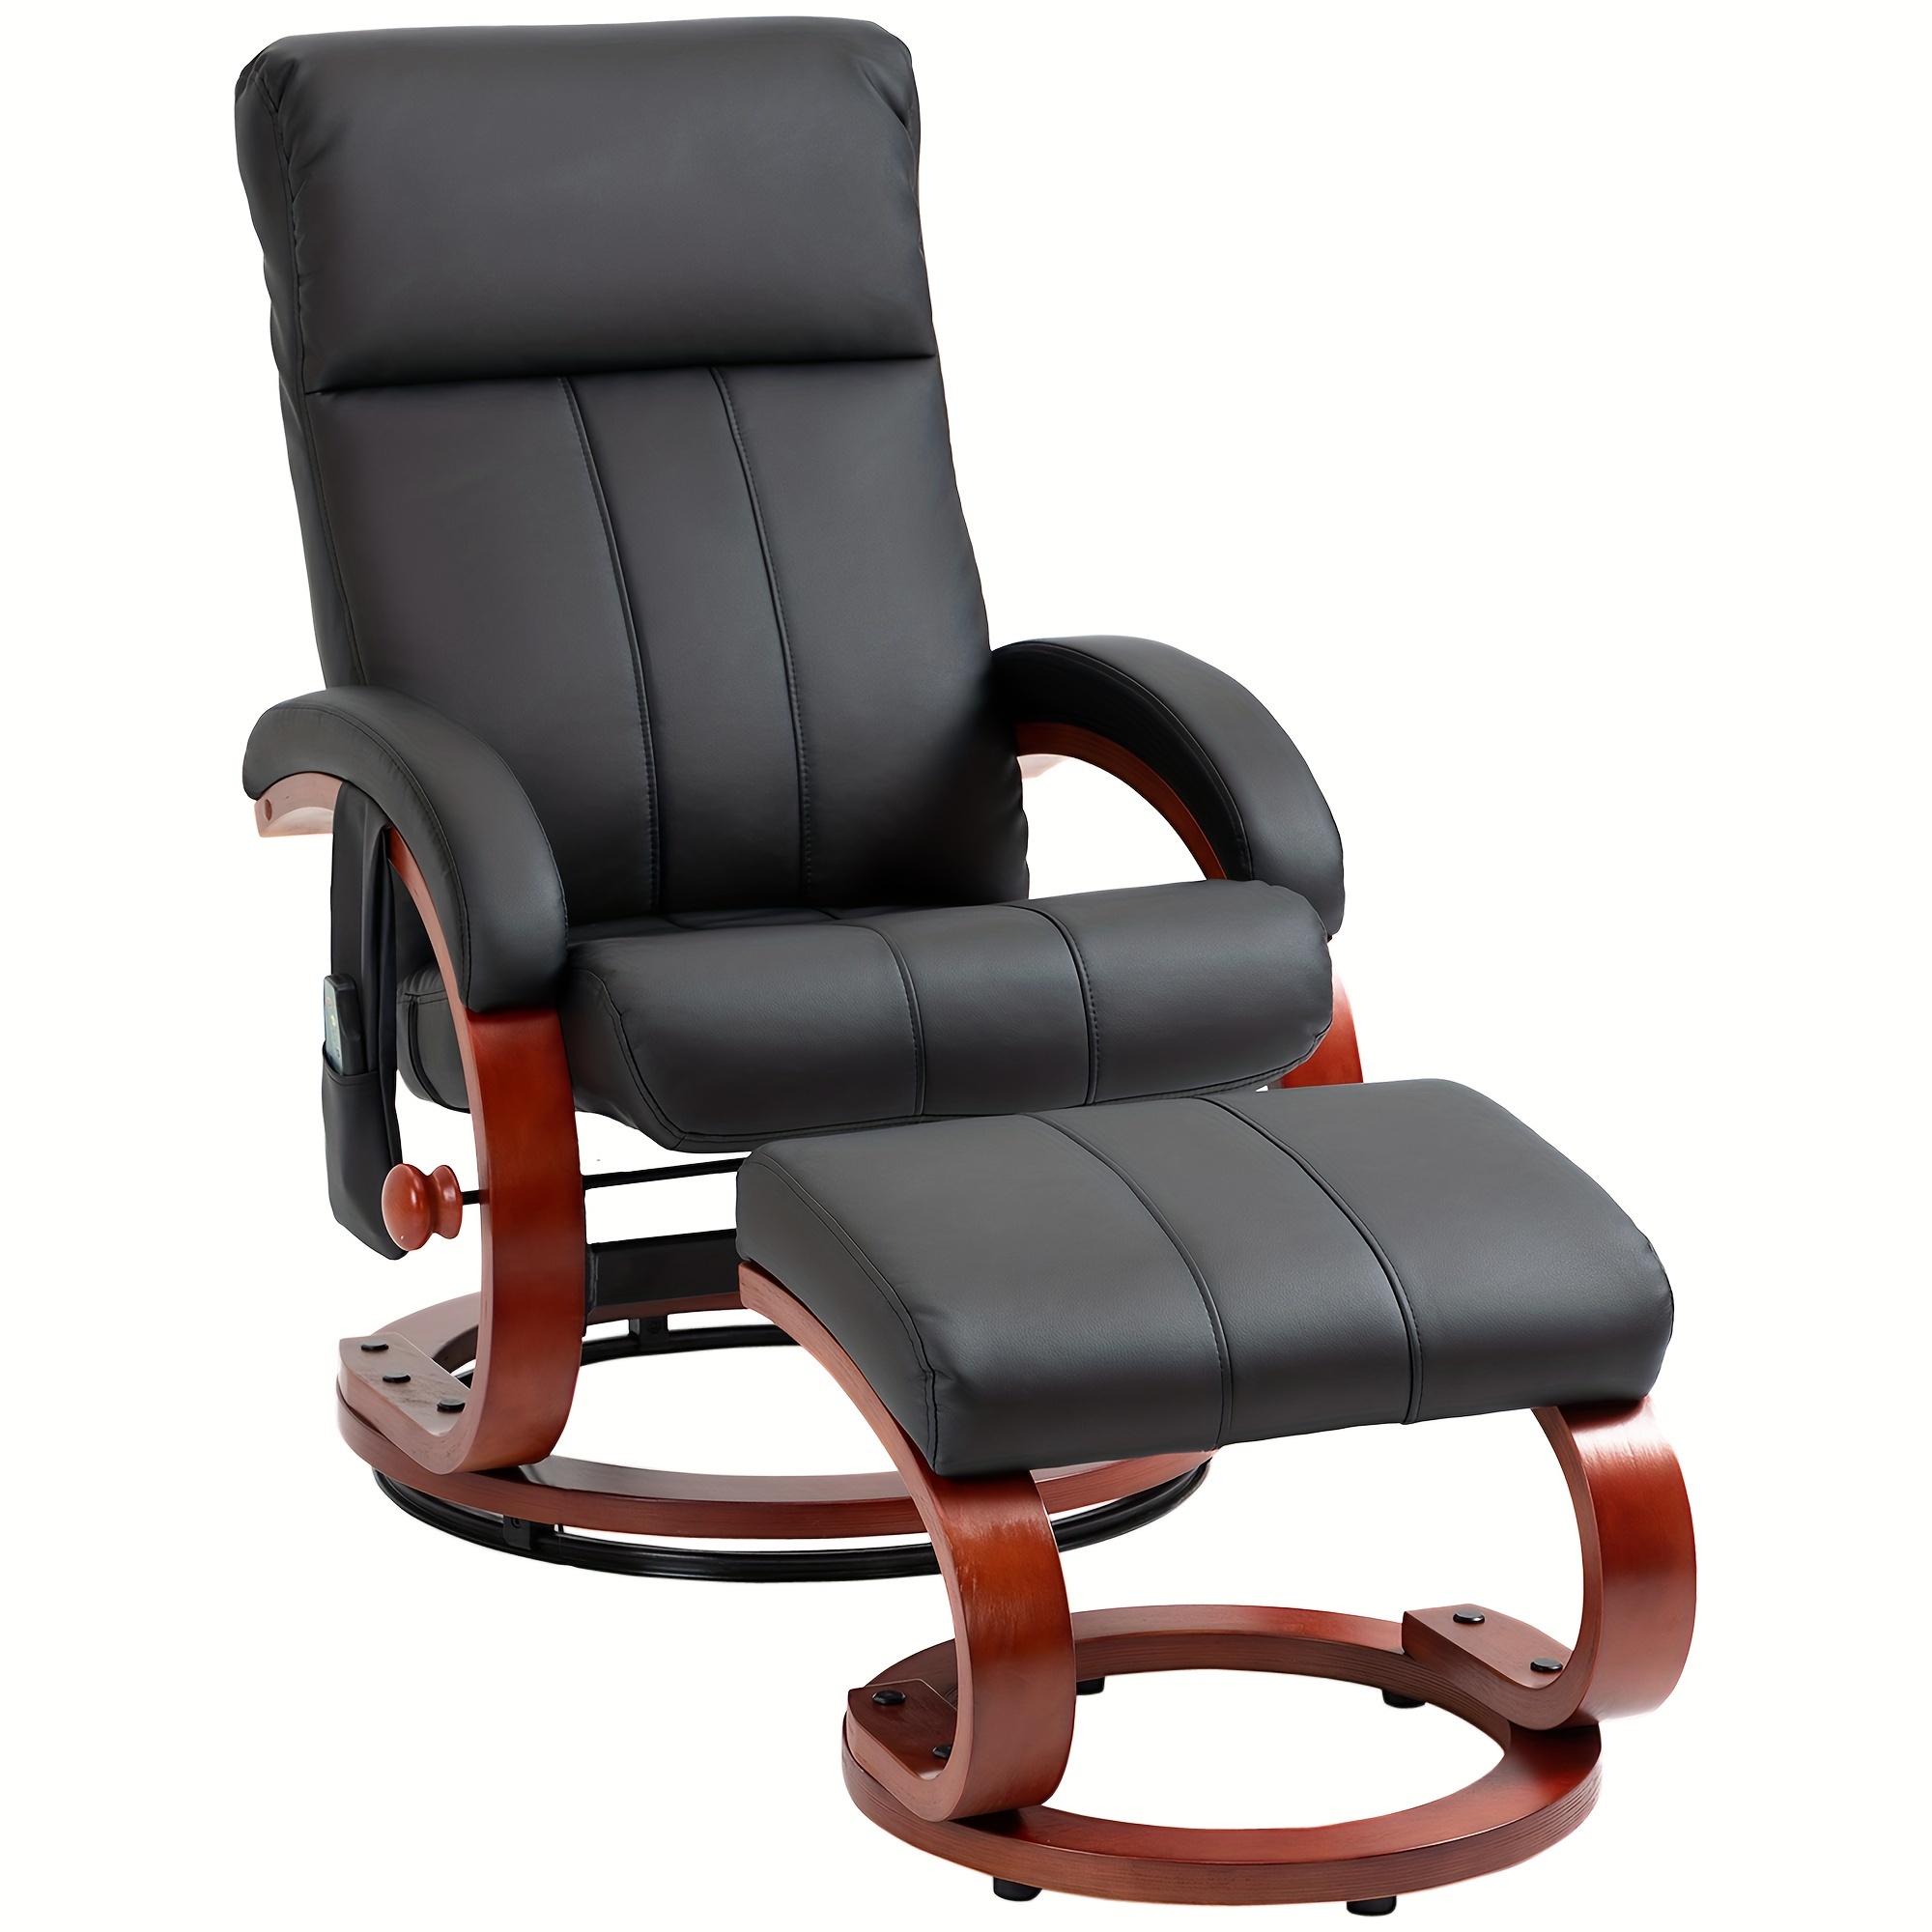 

Homcom Recliner Chair With Ottoman, Electric Faux Leather Recliner With 10 Vibration Points And 5 Massage Mode, Reclining Chair With Remote Control, Swivel Wood Base And Side Pocket, Black